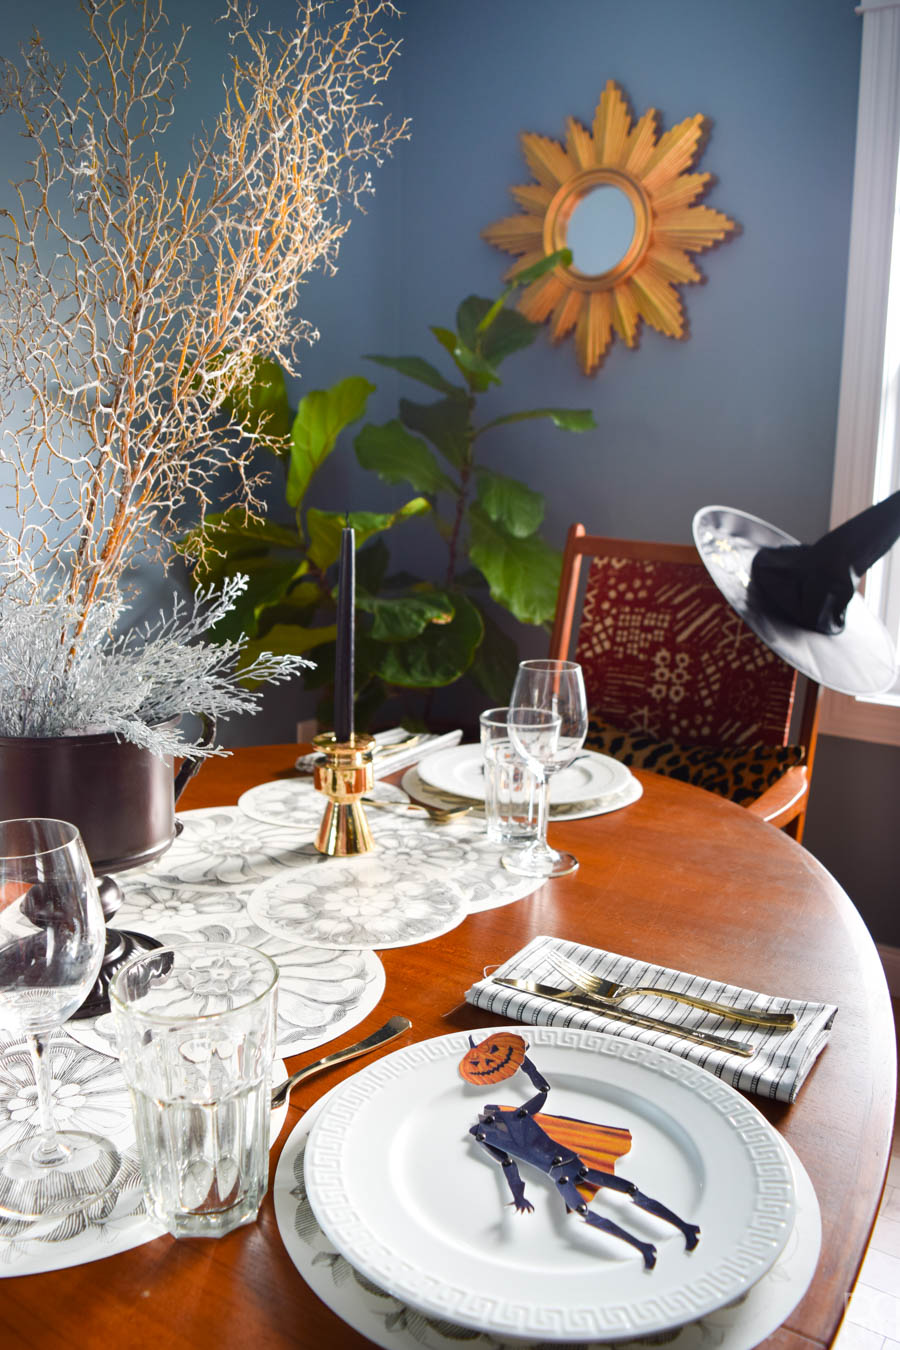 An All Hallows Eve Tablescape that's mature enough for dinner, and low-key enough for a casual dinner with friends. Grab your costume and maybe a candy.